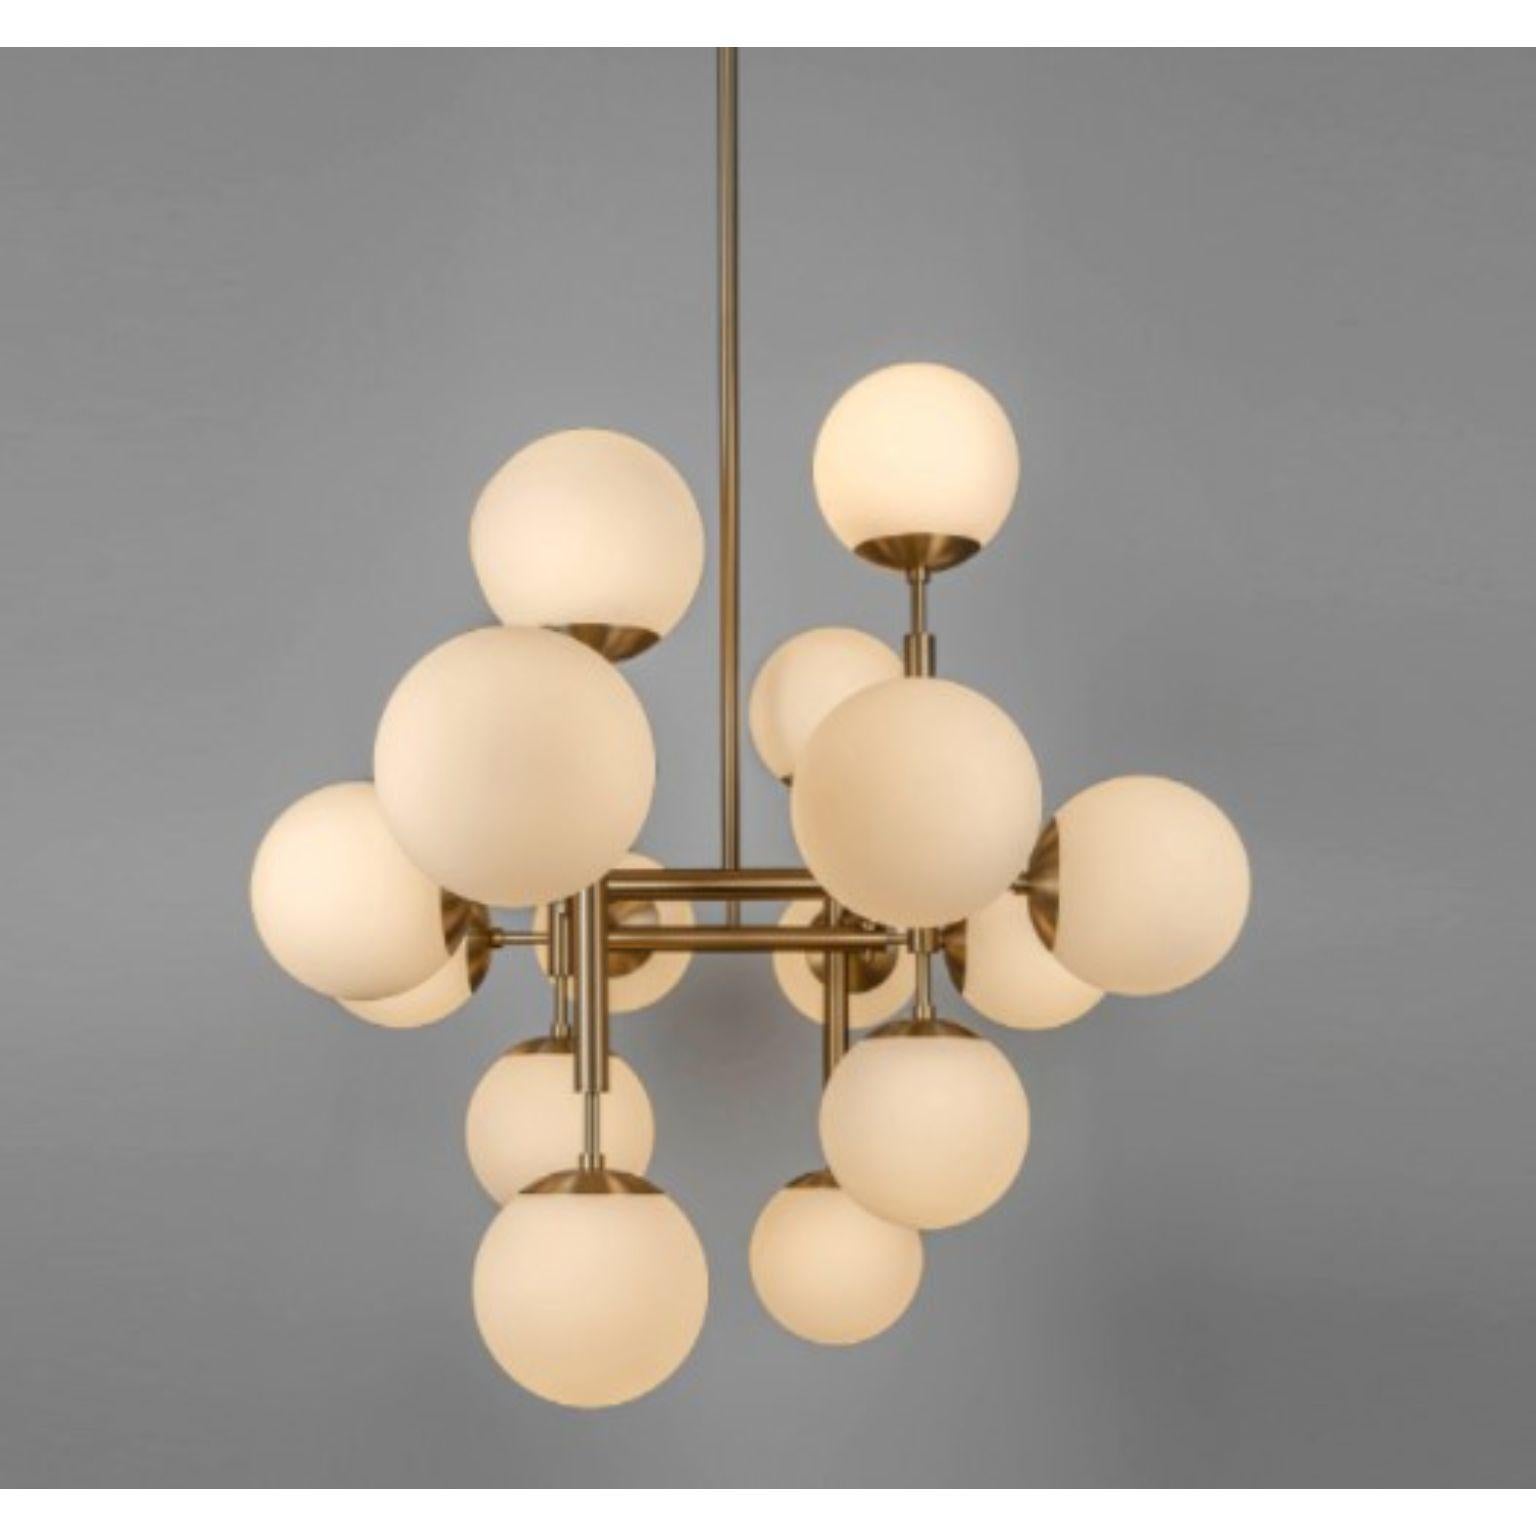 Riegel chandelier by Schwung
Dimensions: D 175.8 x H 199 cm
Materials: brass, opal glass
Weight: 31.2 kg

Finishes available: Black gunmetal, polished nickel, brass
Other sizes available.

 Schwung is a german word, and loosely defined,